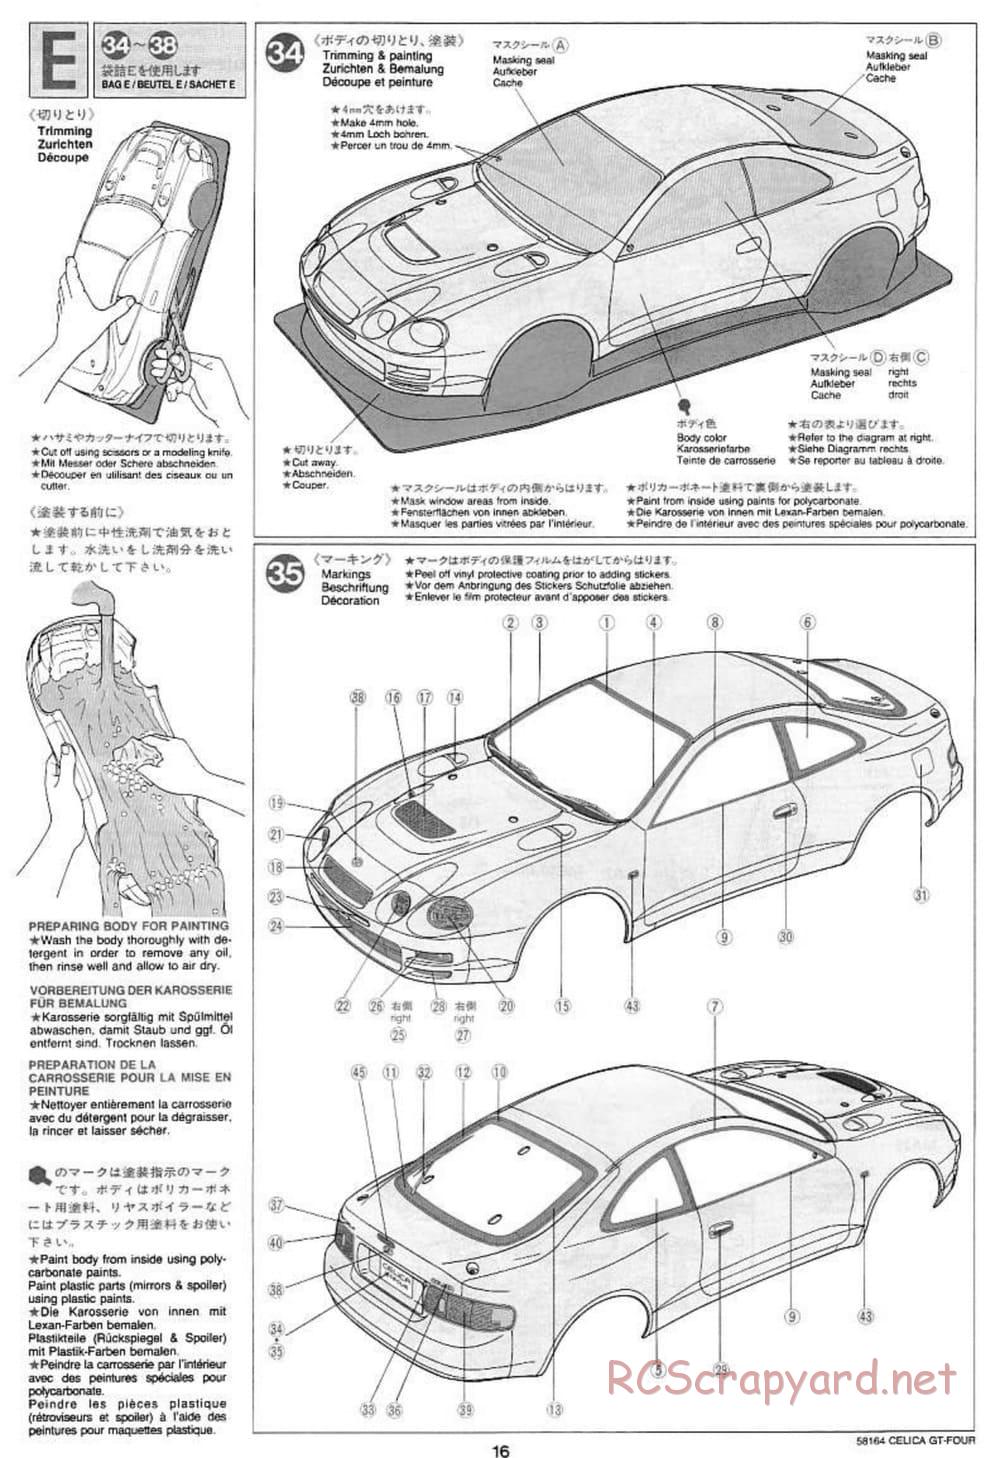 Tamiya - Toyota Celica GT Four - TA-02 Chassis - Manual - Page 16